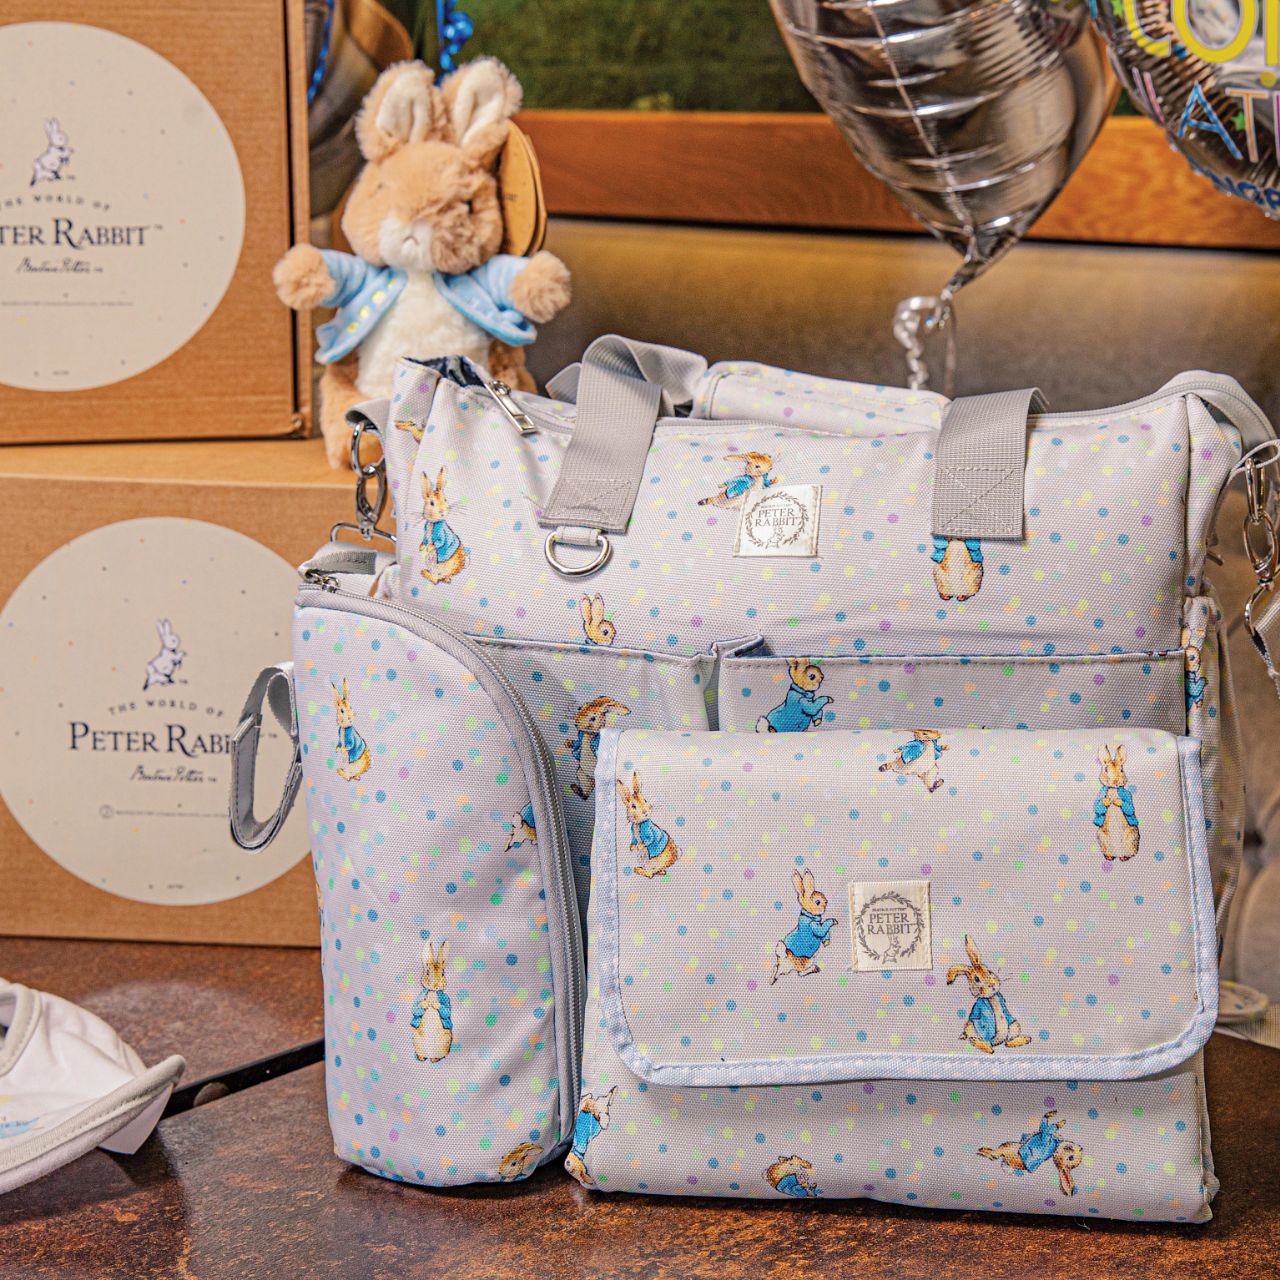 This Peter Rabbit soft toy is made from beautifully soft fabric and is dressed in clothing exactly as illustrated by Beatrix Potter, with his signature blue jacket. The Peter Rabbit collection features the much loved characters from the Beatrix Potter books and this quality and authentic soft toy is sure to be adored for many years to come. 